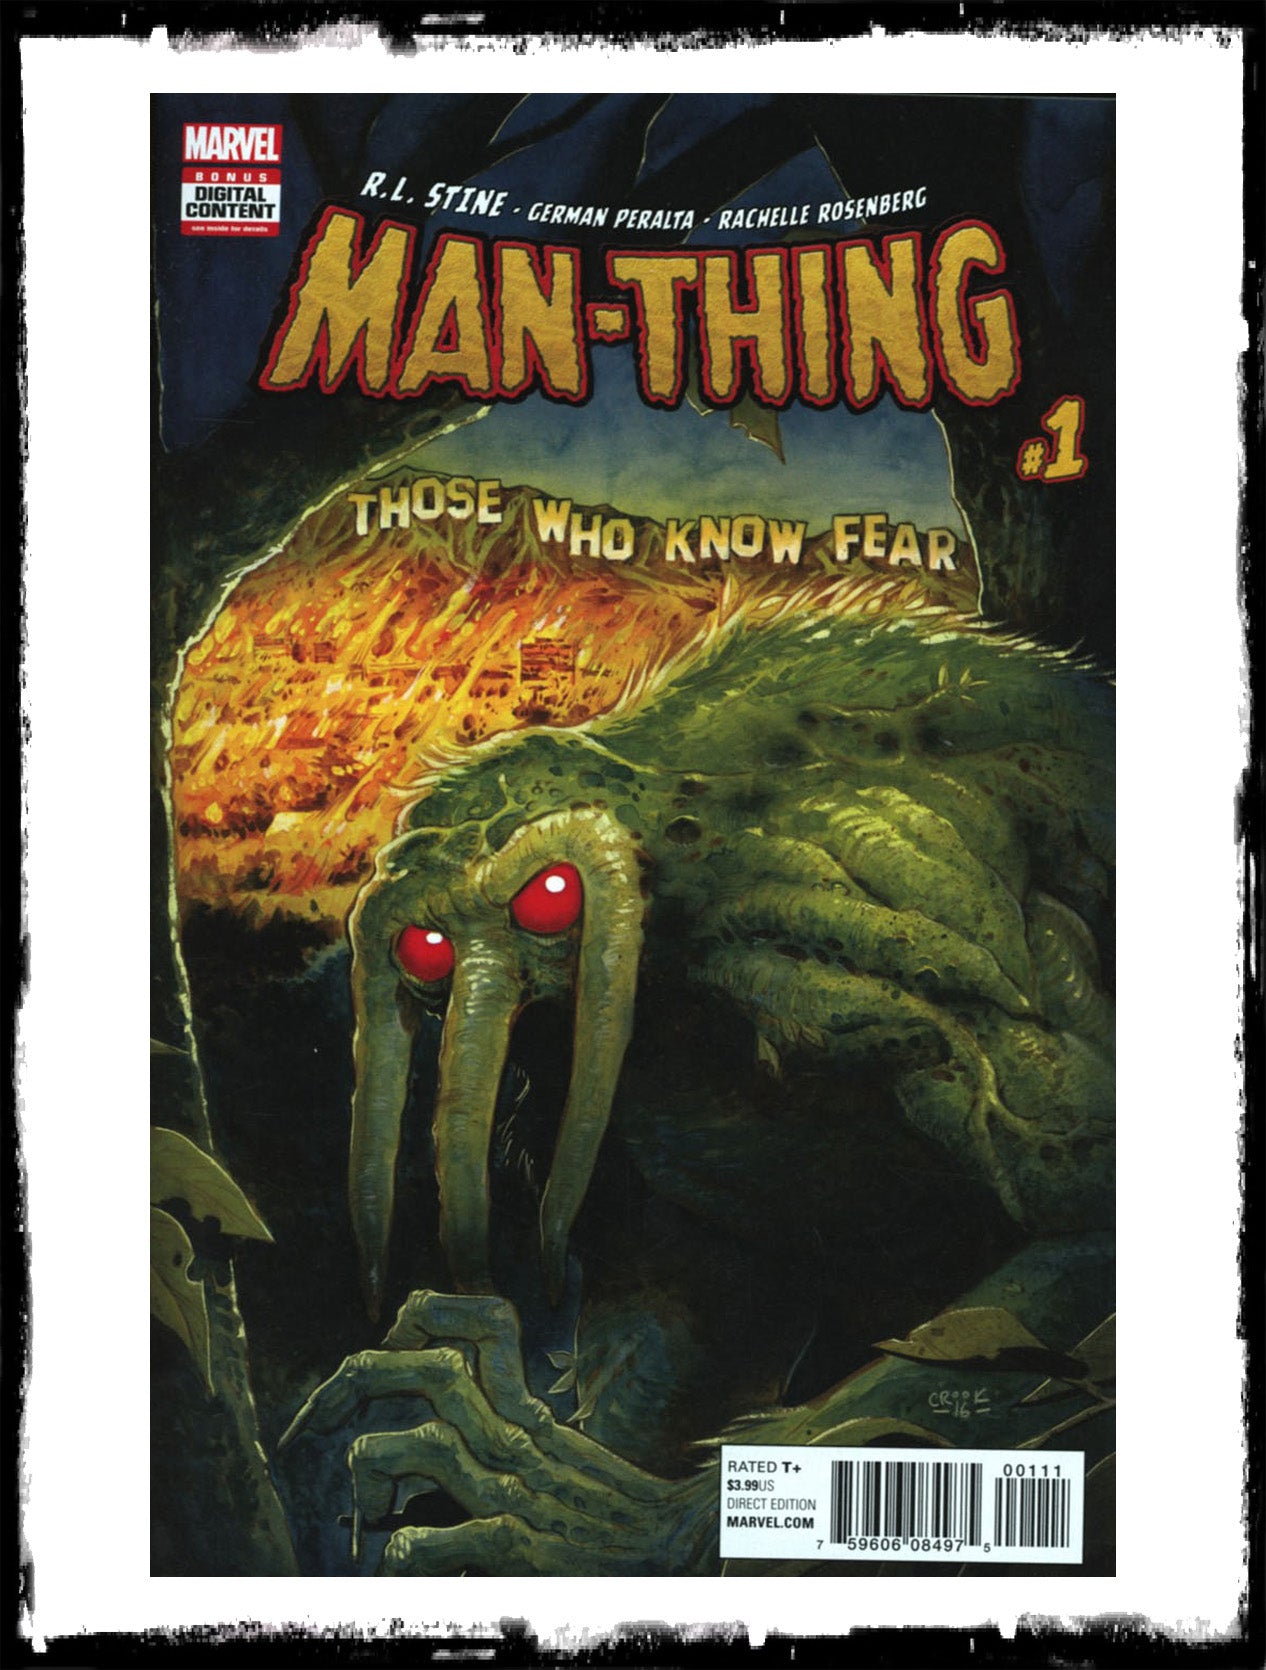 MAN-THING - #1 TYLER CROOK COVER (2017 - VF+)